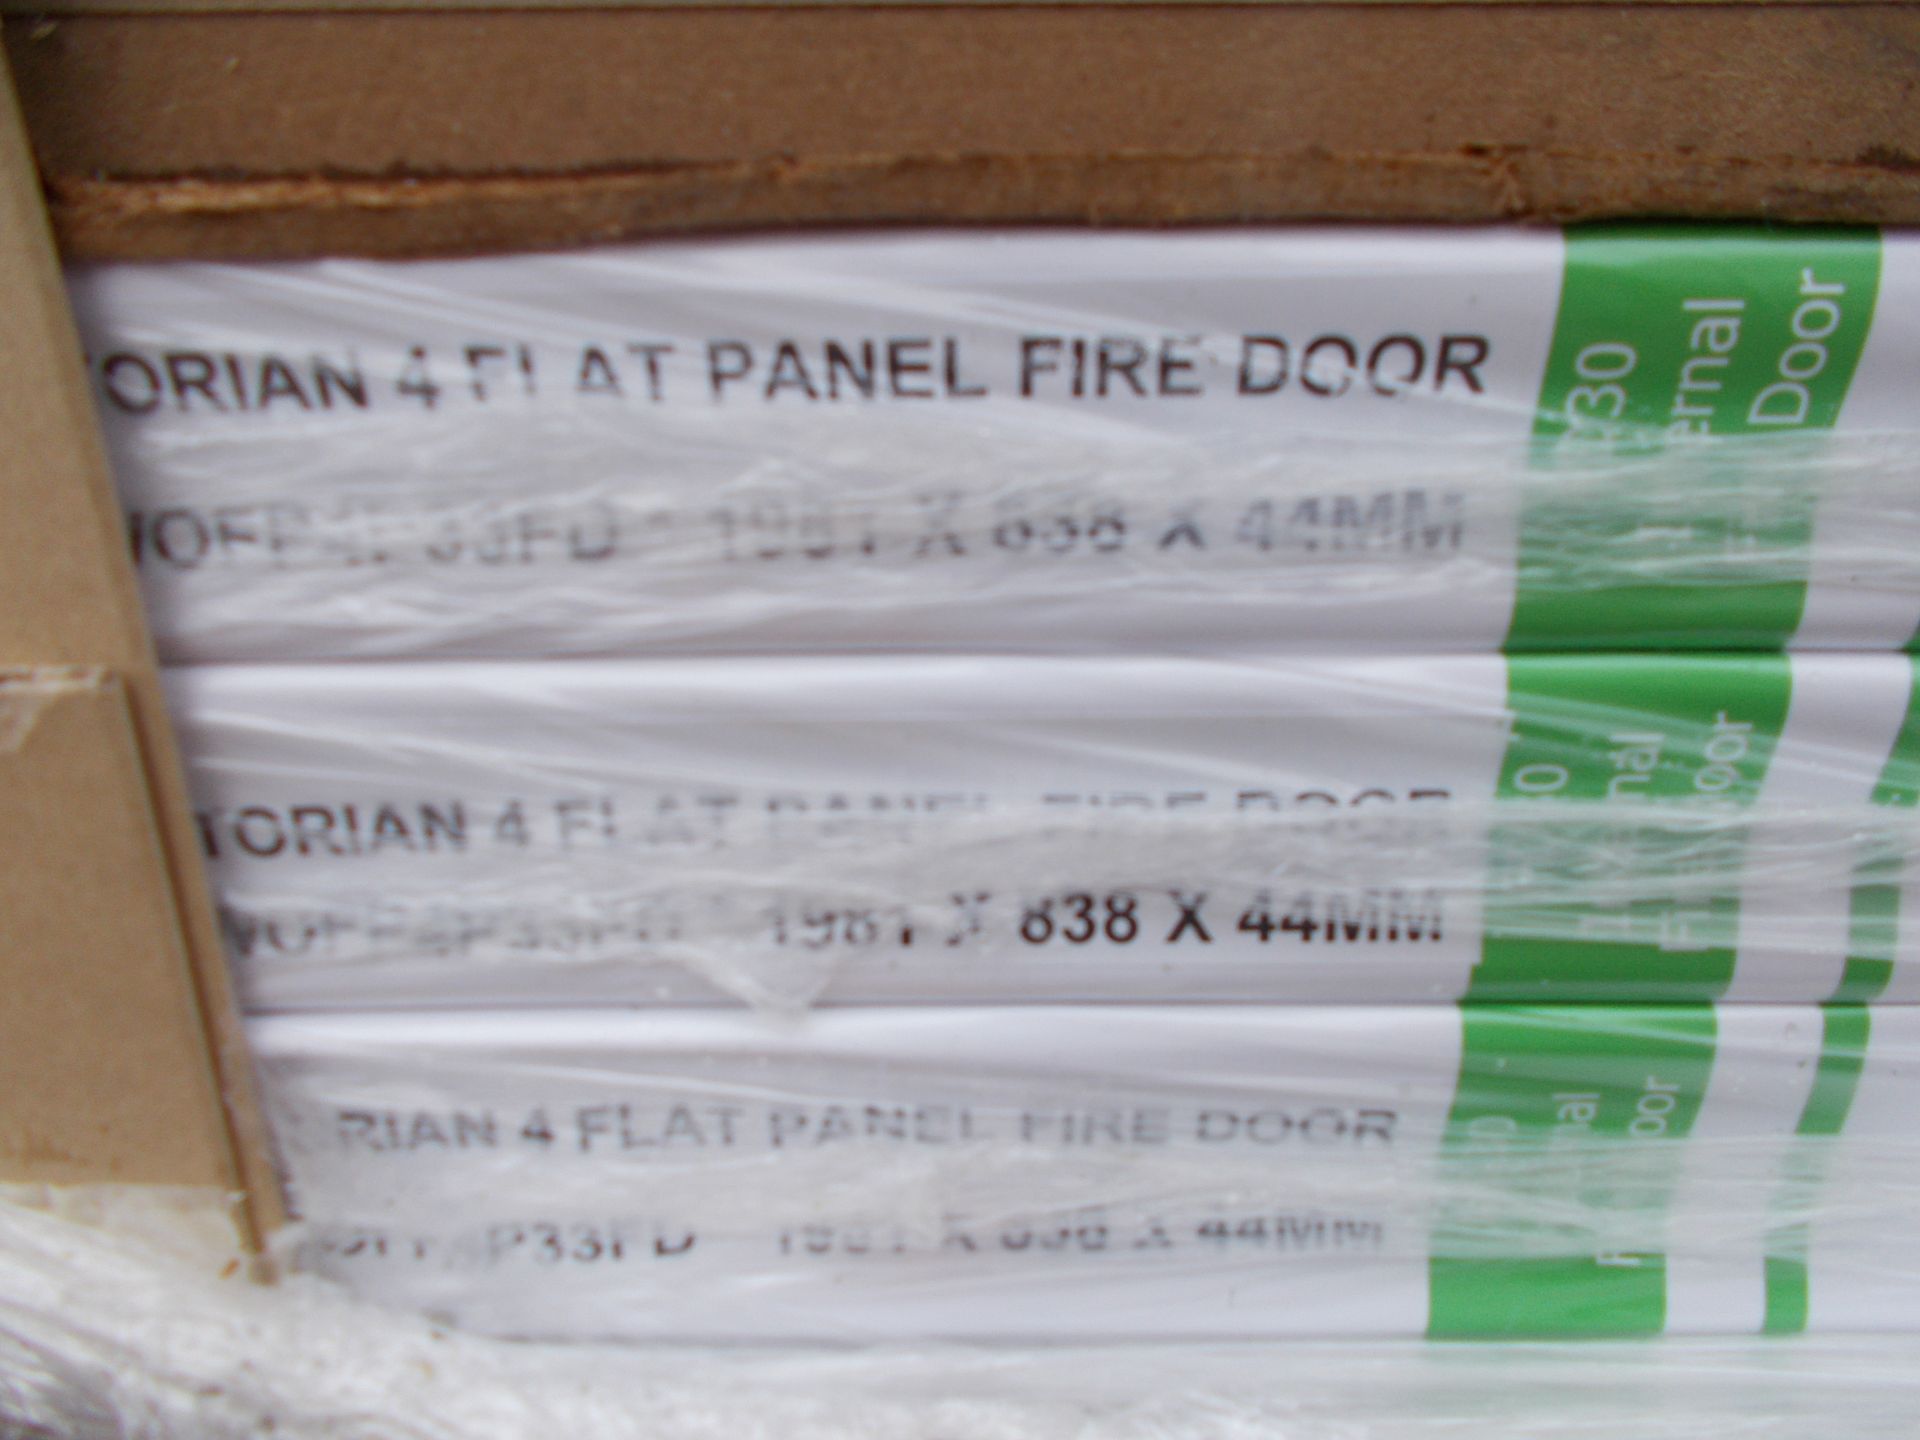 5 x Victorian 4 Flat Panel Int Fire Door AWOFP4P33FD, 1981x838x44mm - Lots to be handed out in order - Image 3 of 3